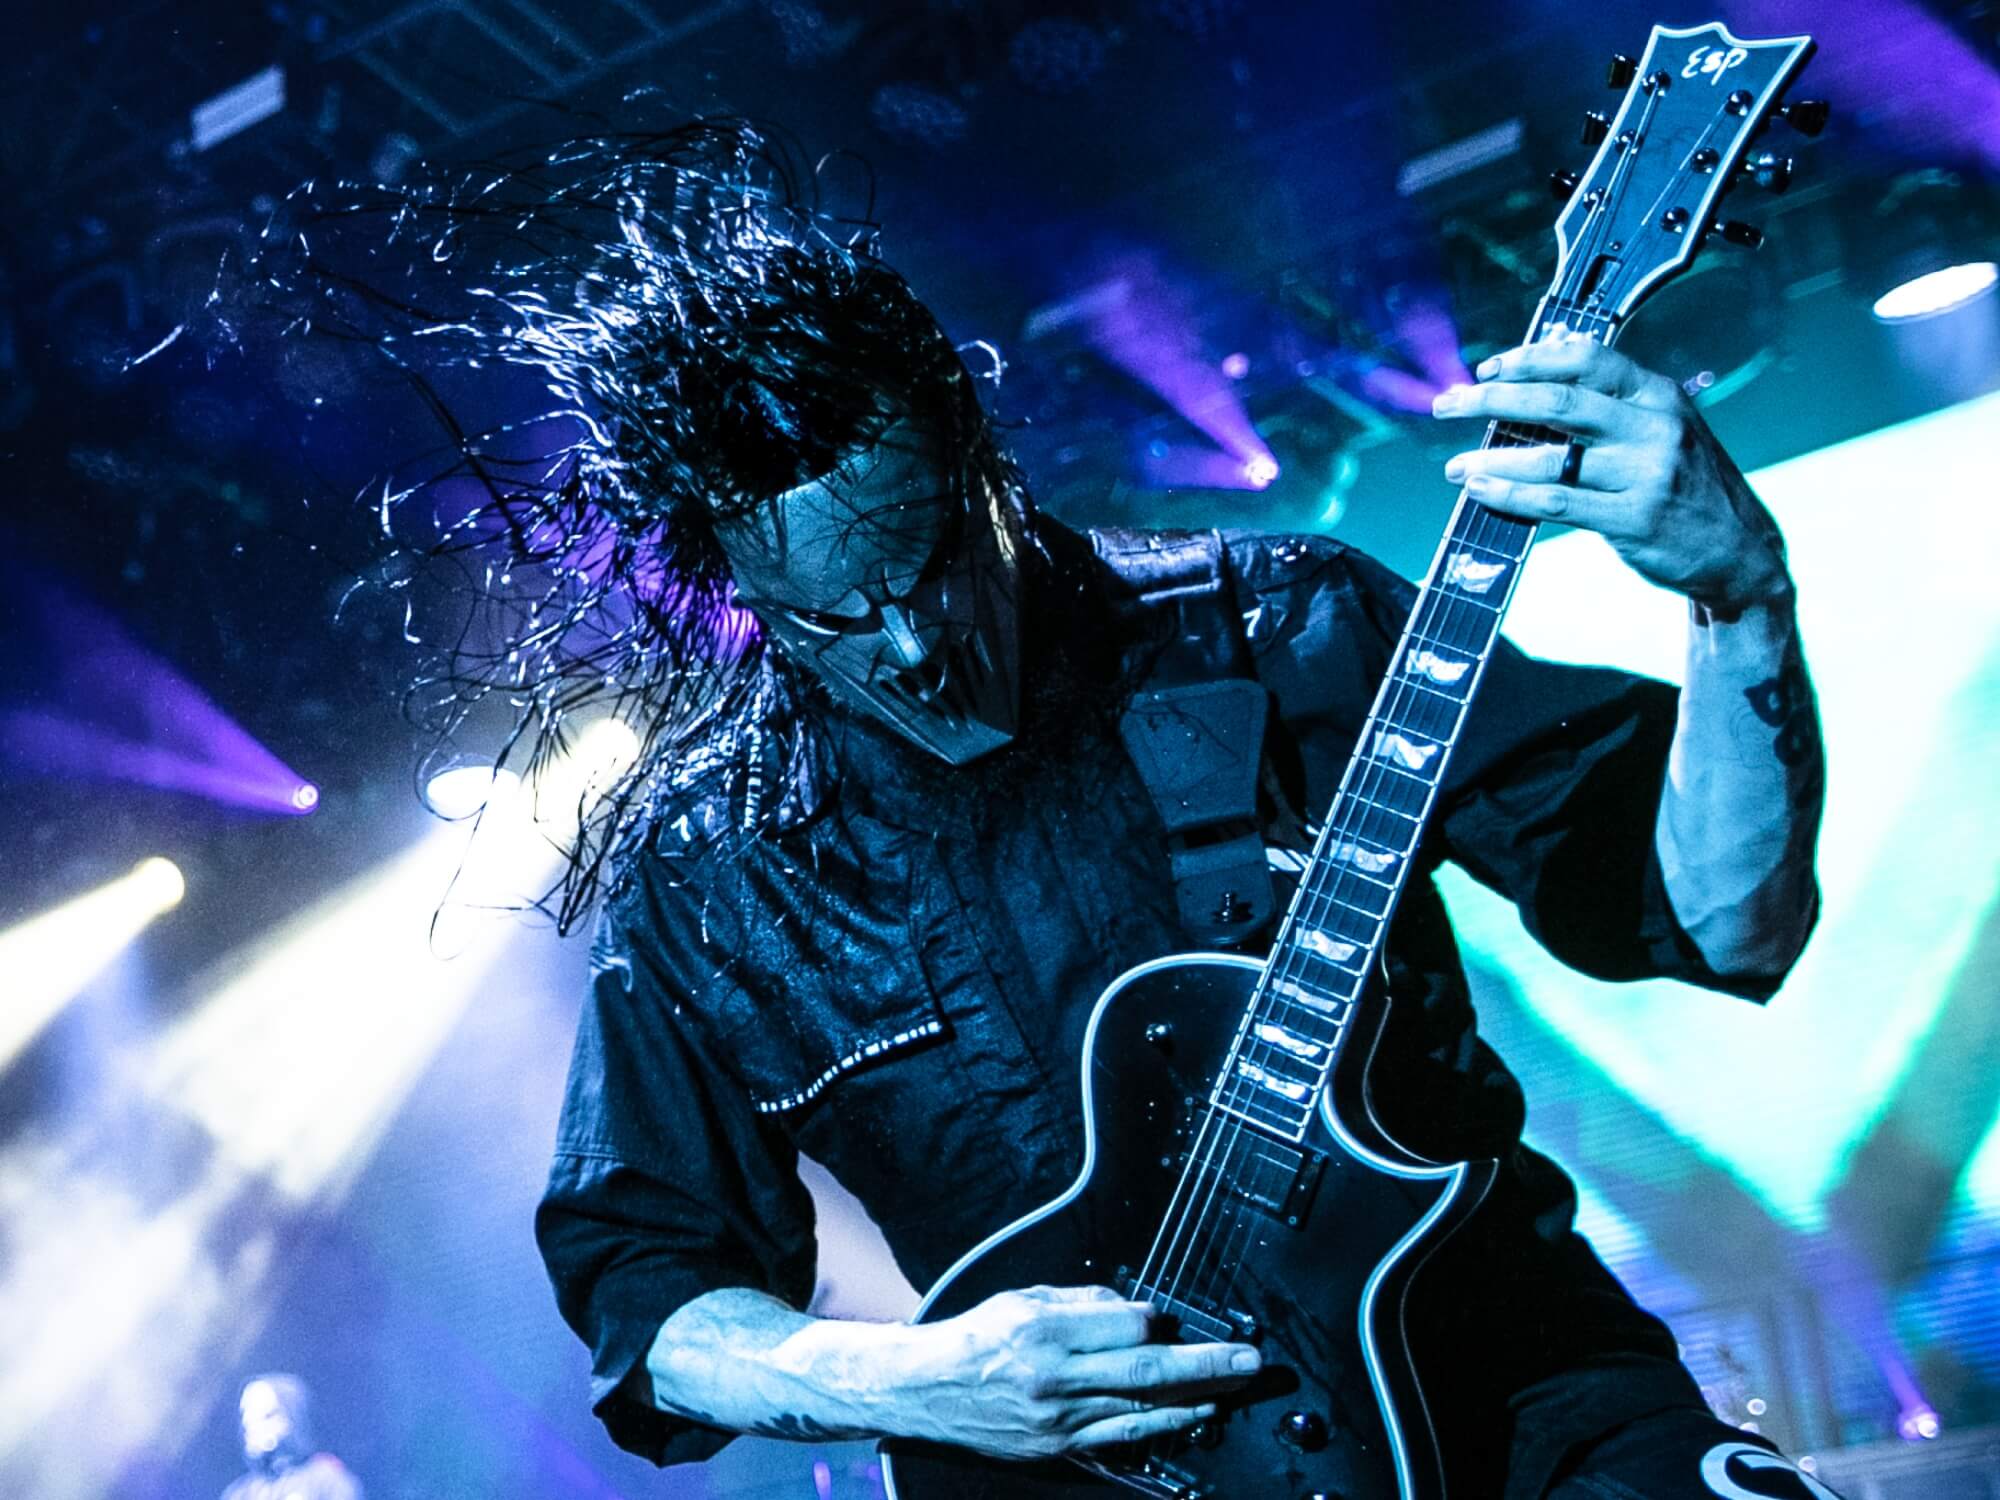 Mick Thomson performs live with Slipknot